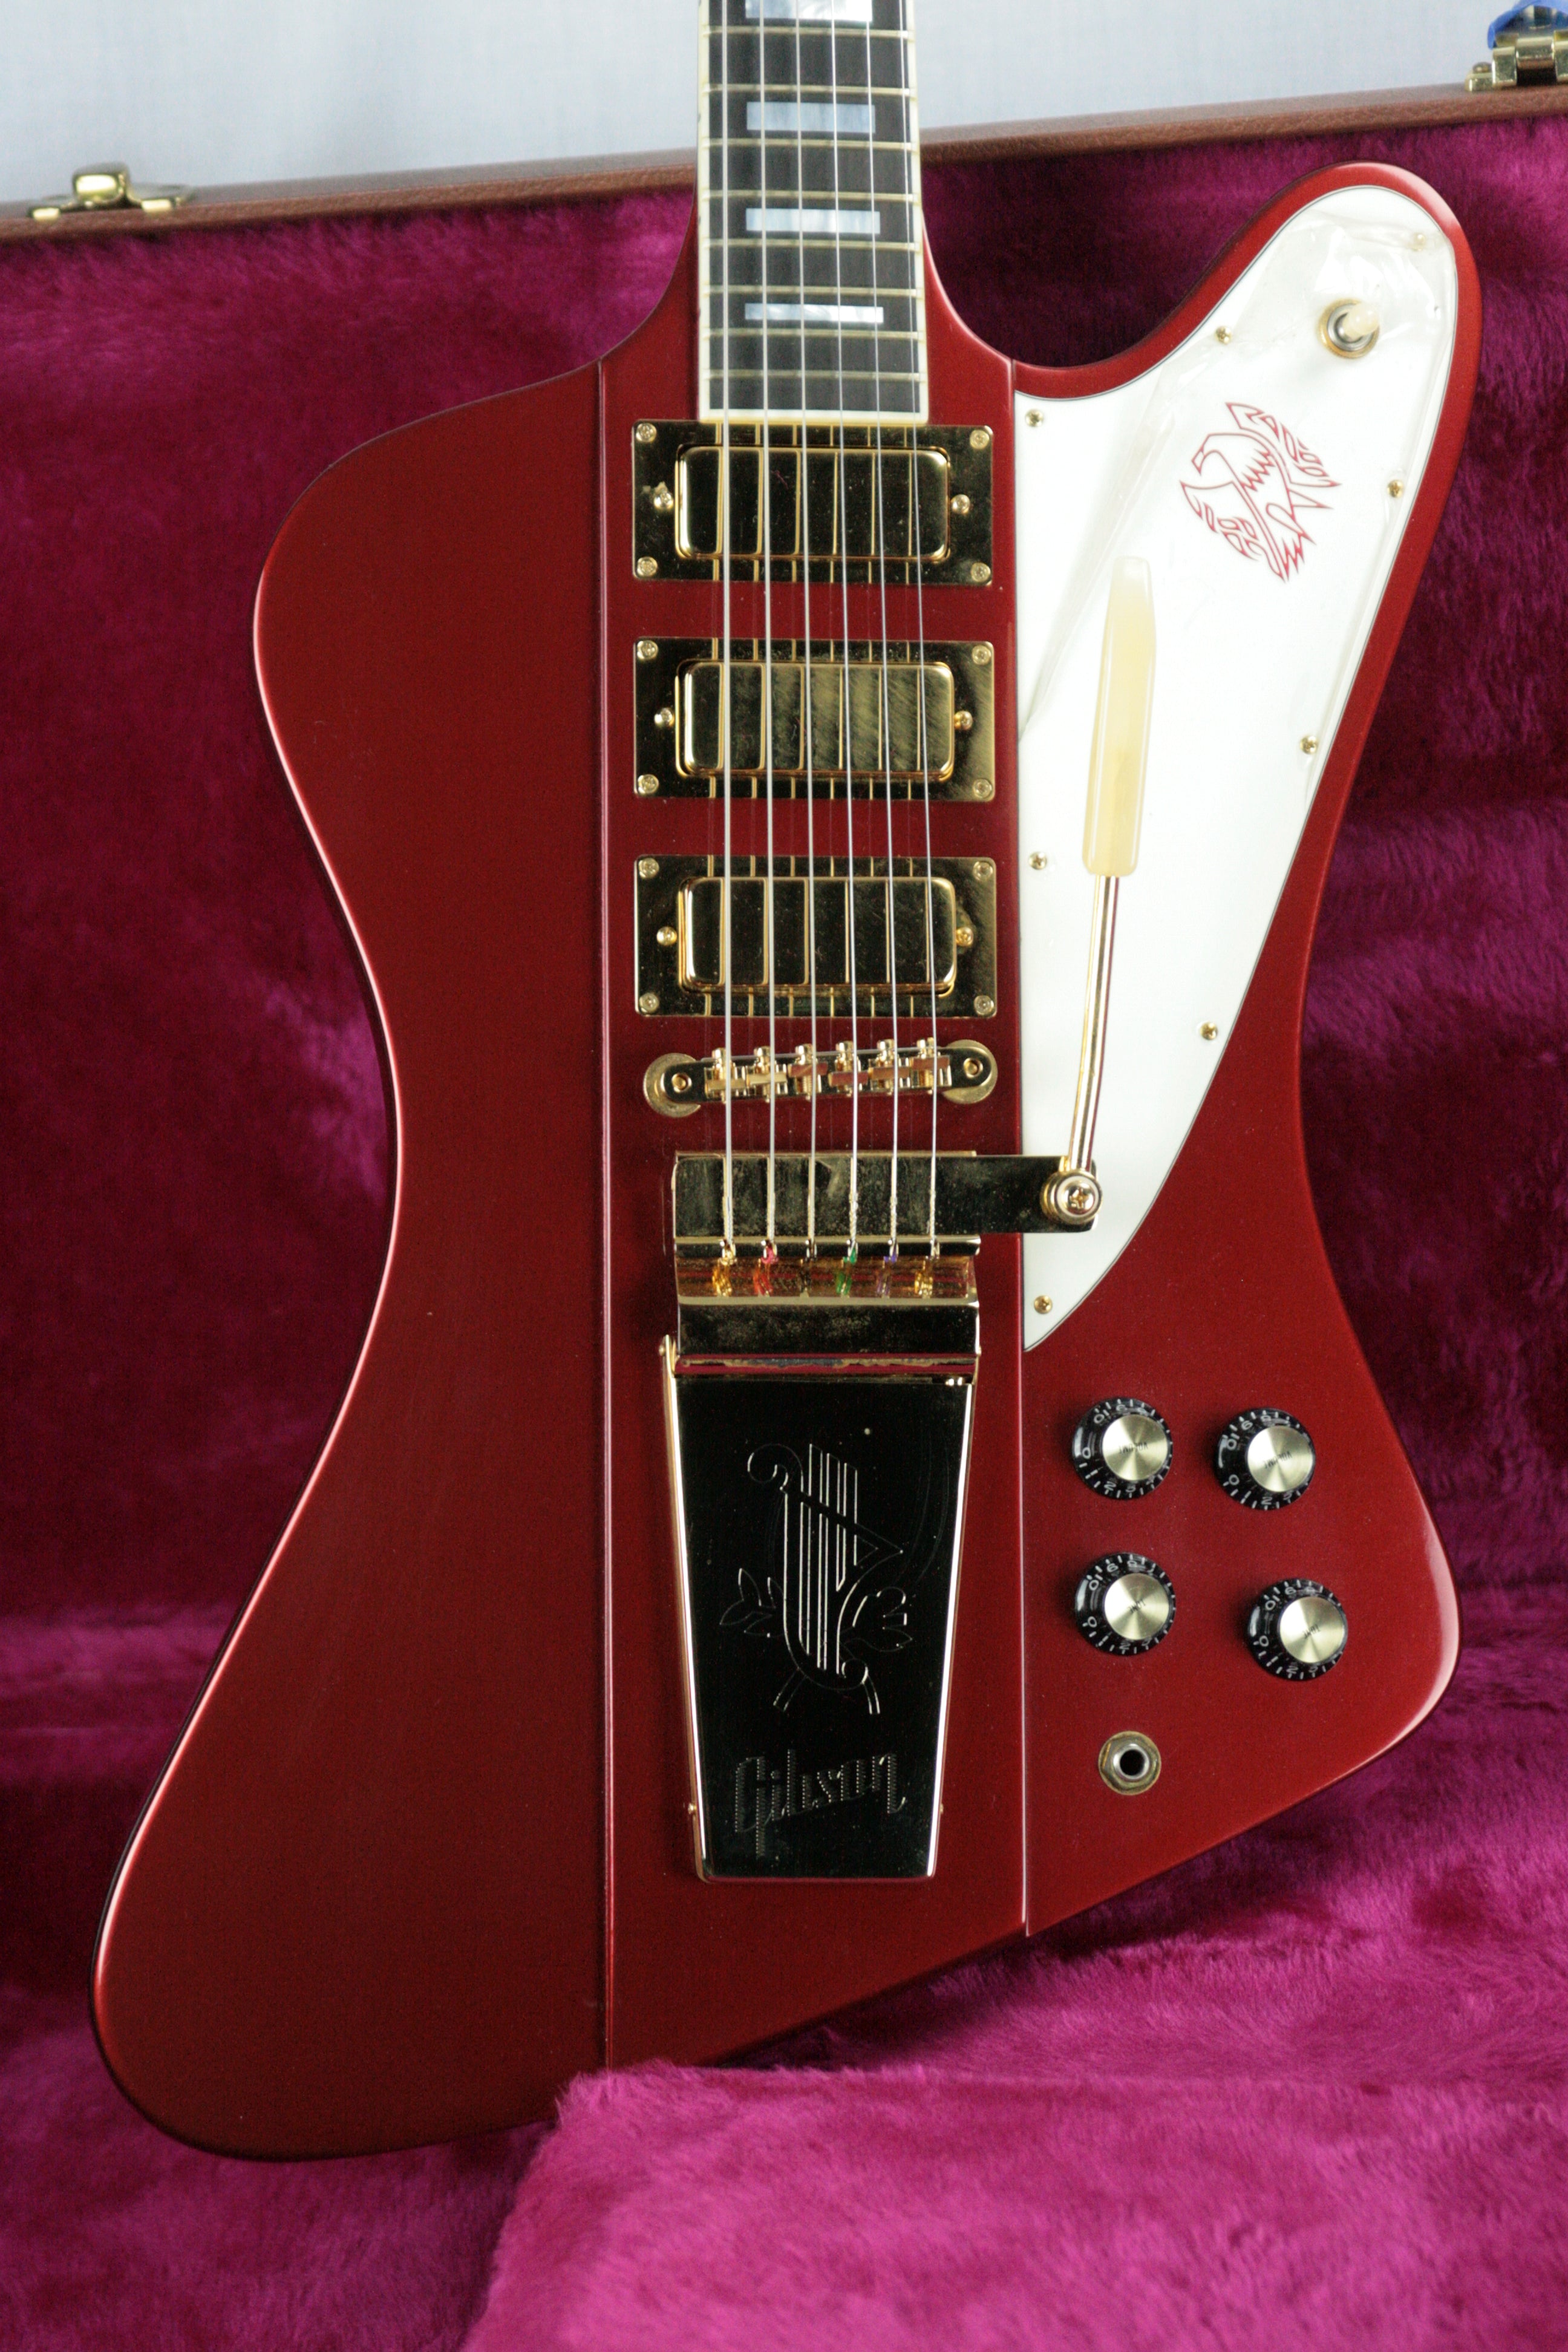 *SOLD*  2003 Gibson Firebird VII Candy Apple Red EBONY Board Limited Edition Maestro